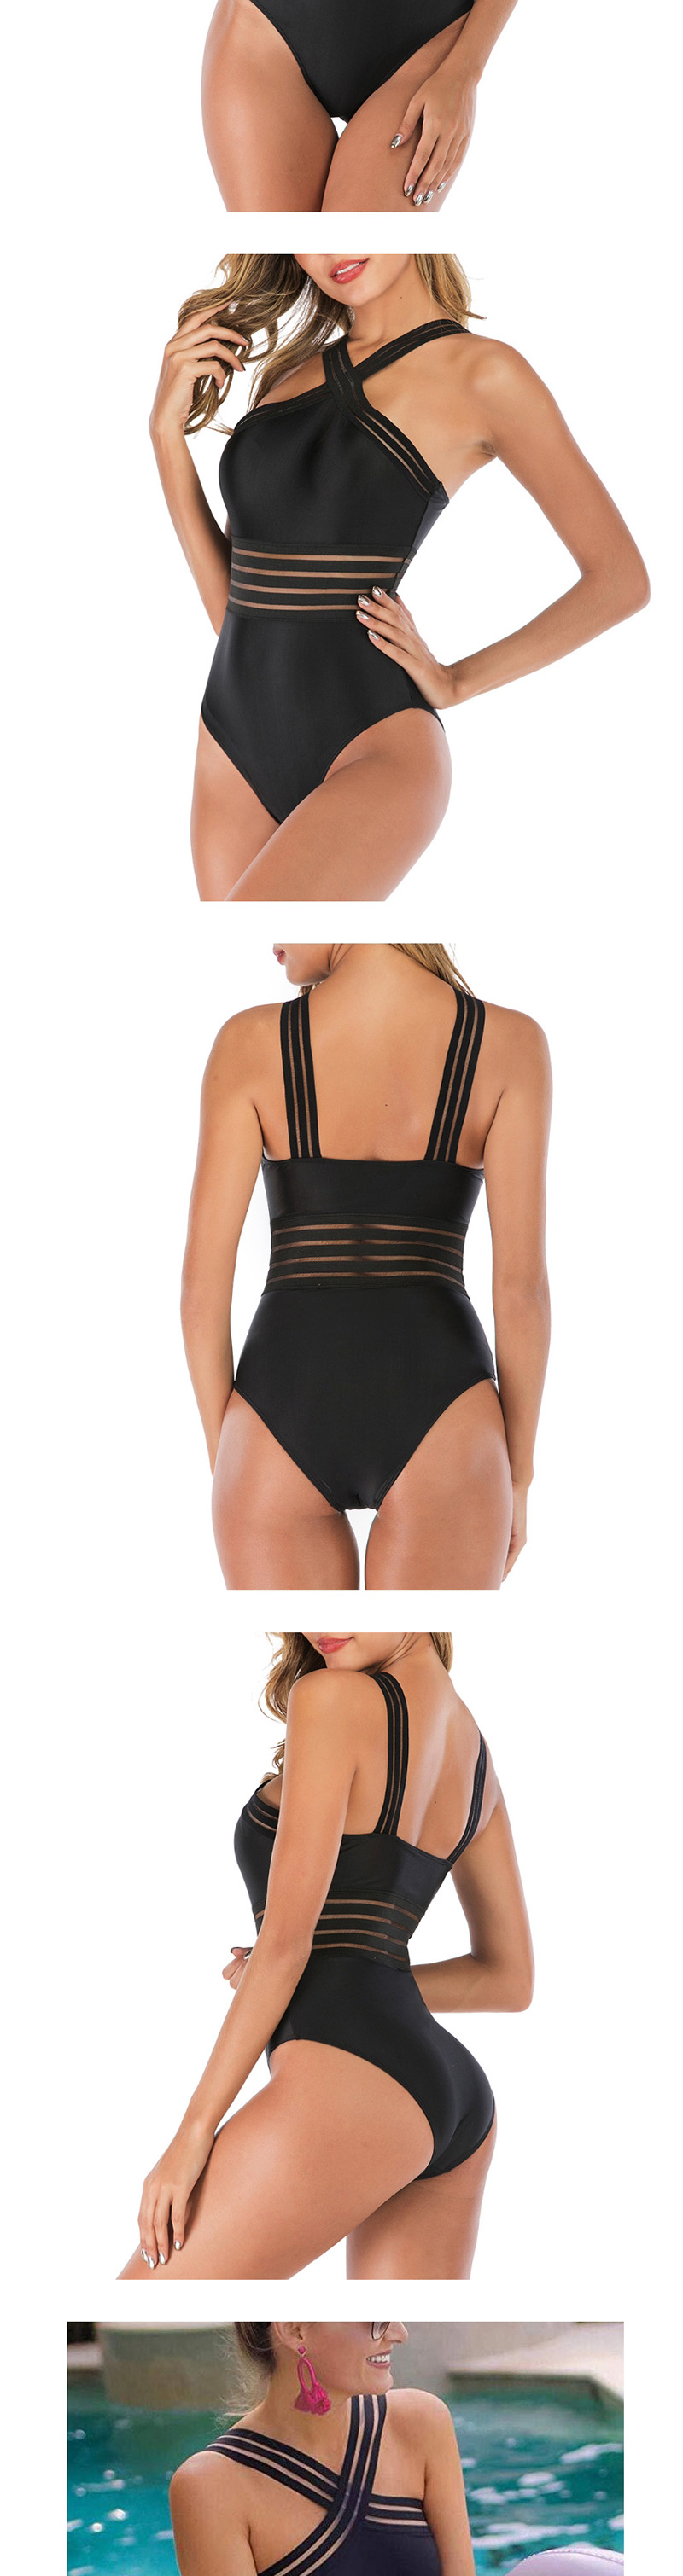 Fashion Red Ribbon Bandage Cross-piece Swimsuit,One Pieces